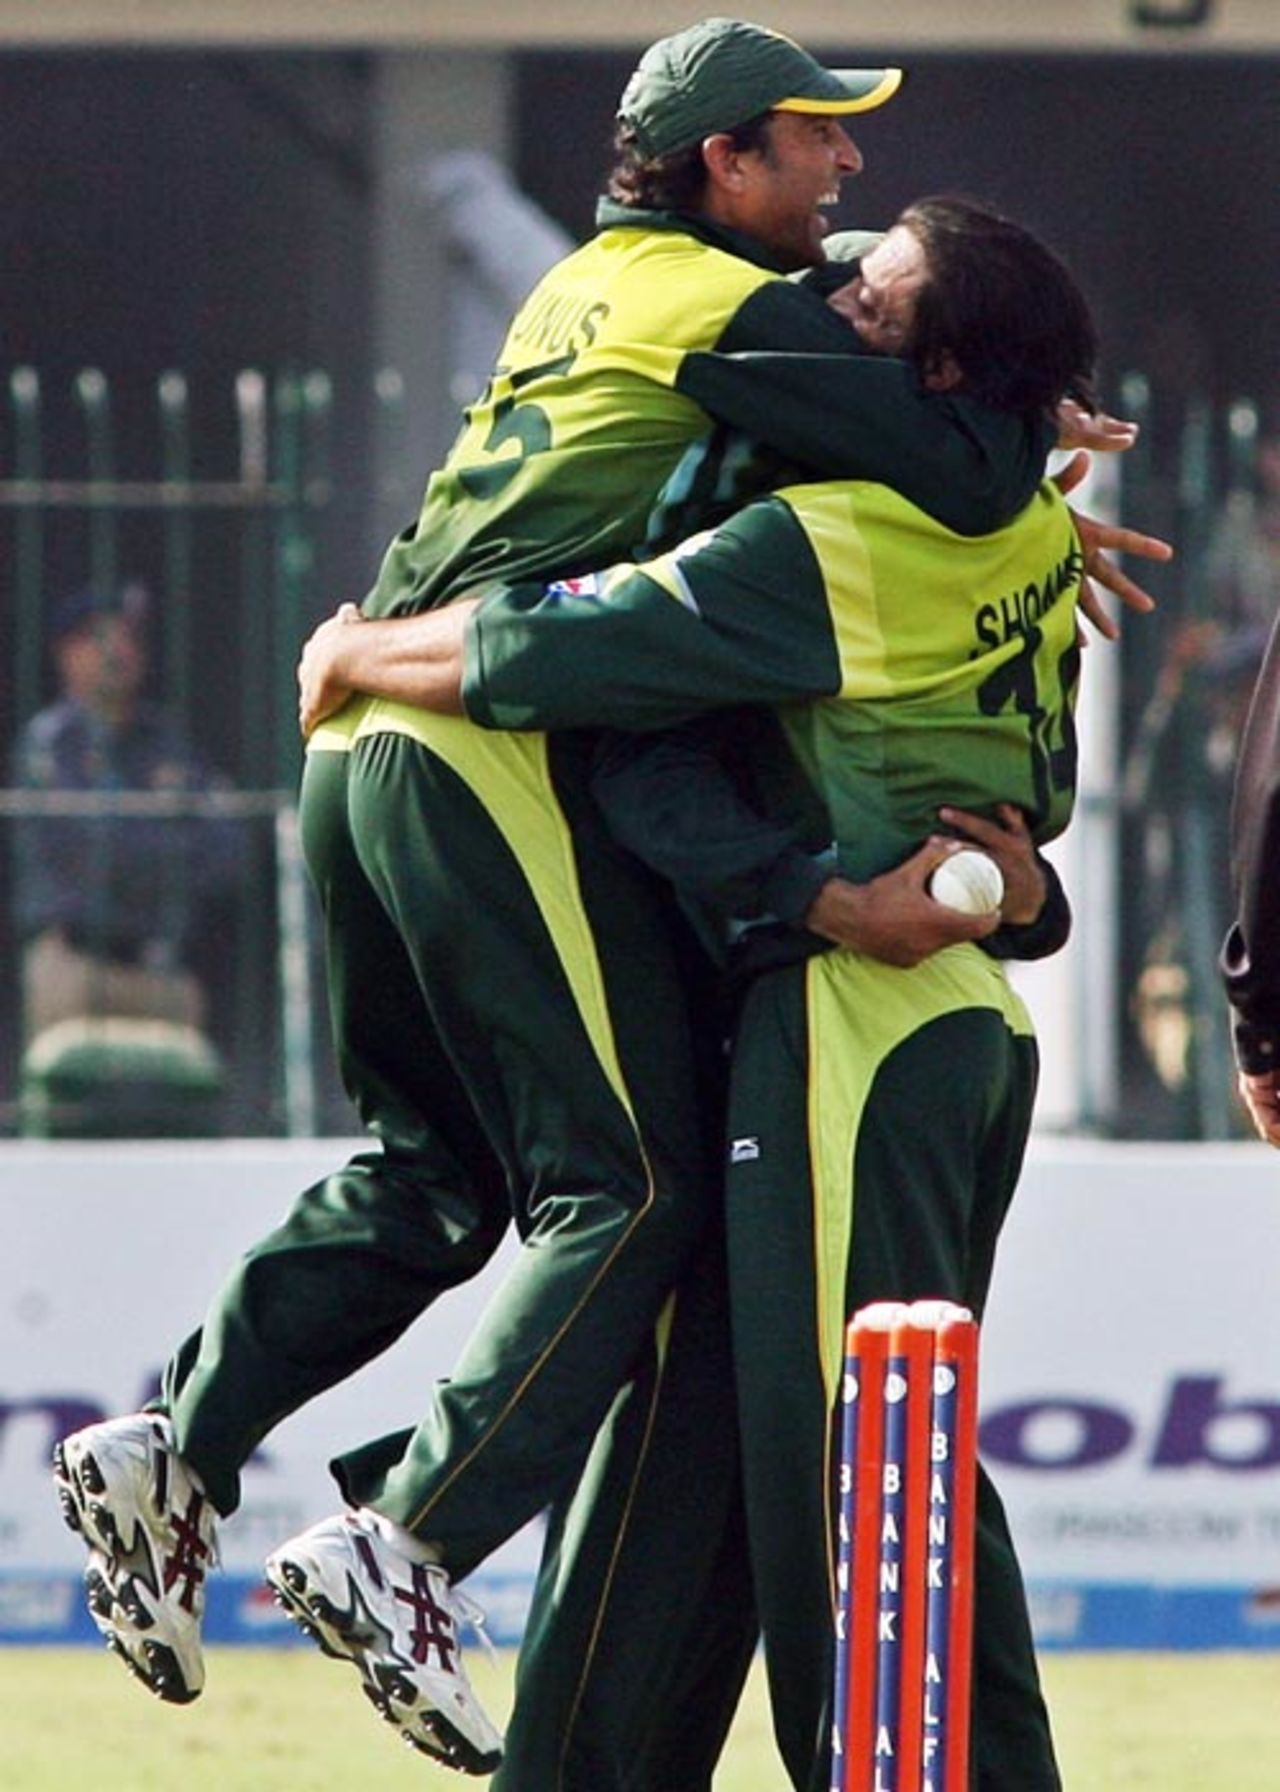 Shoaib Akhtar is mobbed by his team-mates after dismissing Graeme Smith, Pakistan v South Africa, 5th ODI, Lahore, October 29, 2007 